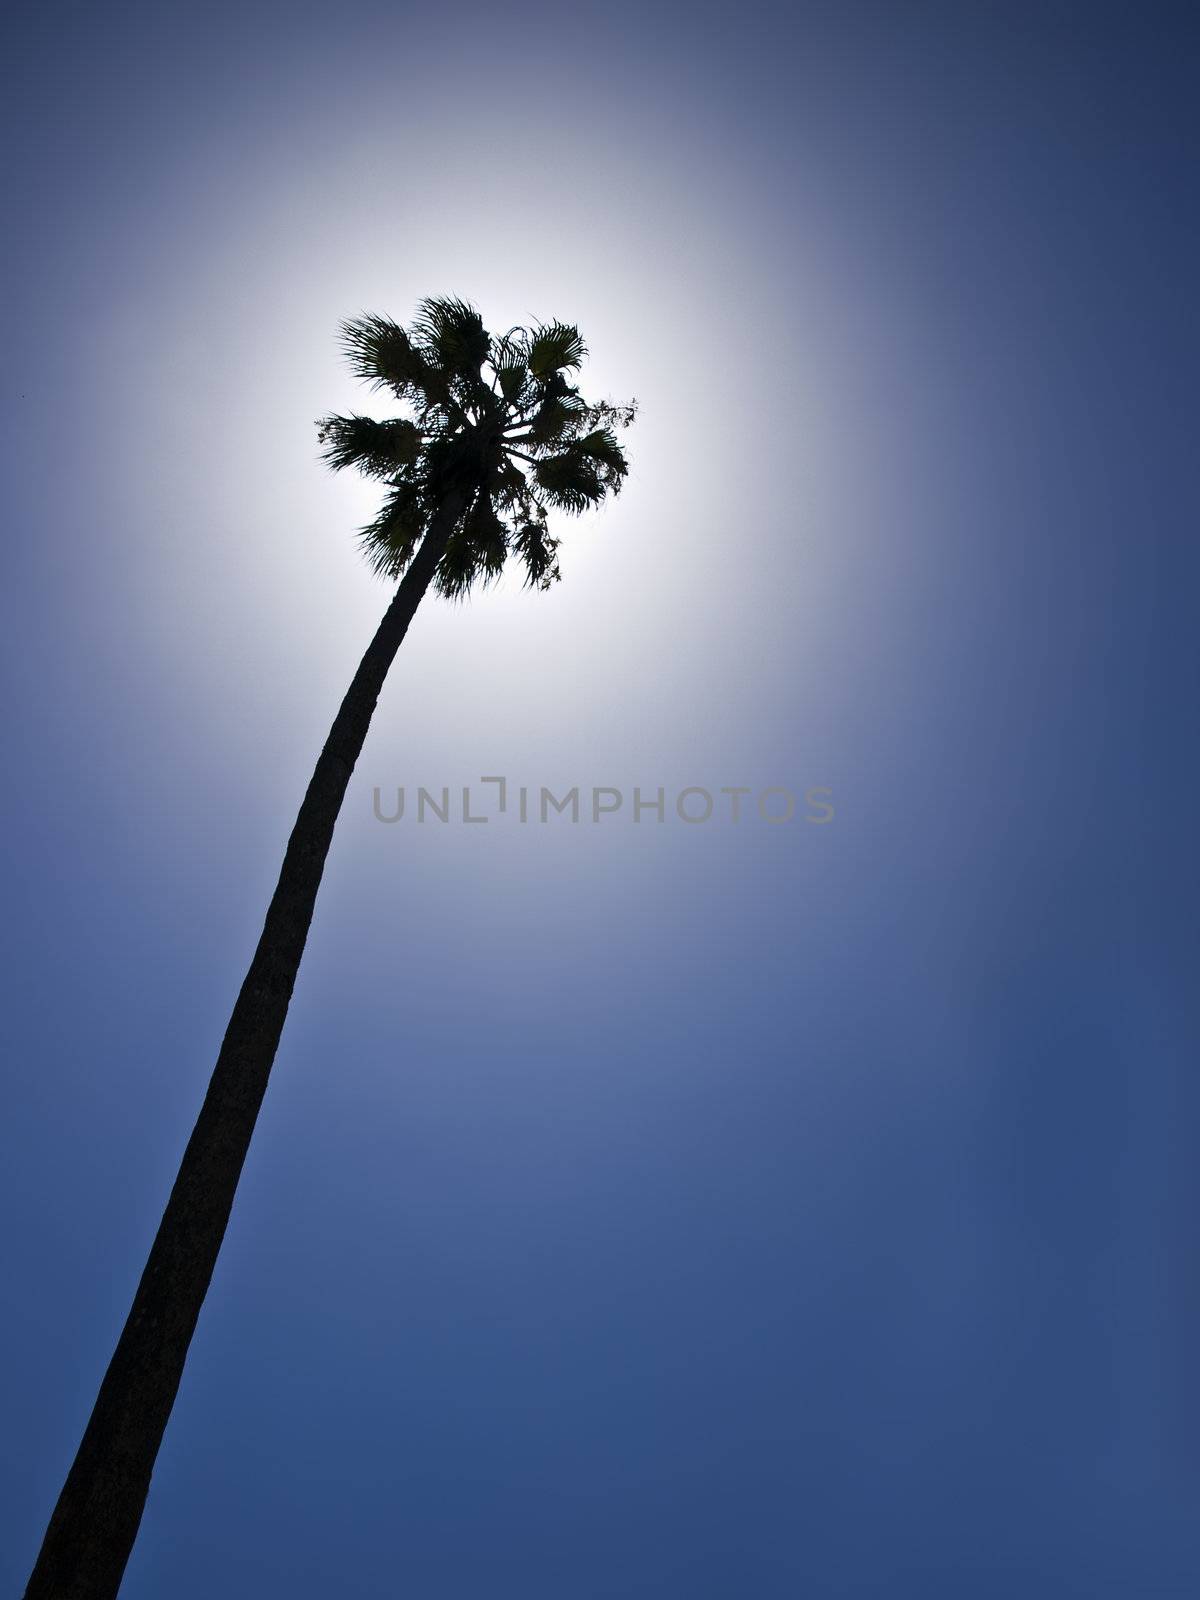 Tropical palm tree silhouetted against sun on summery blue sky